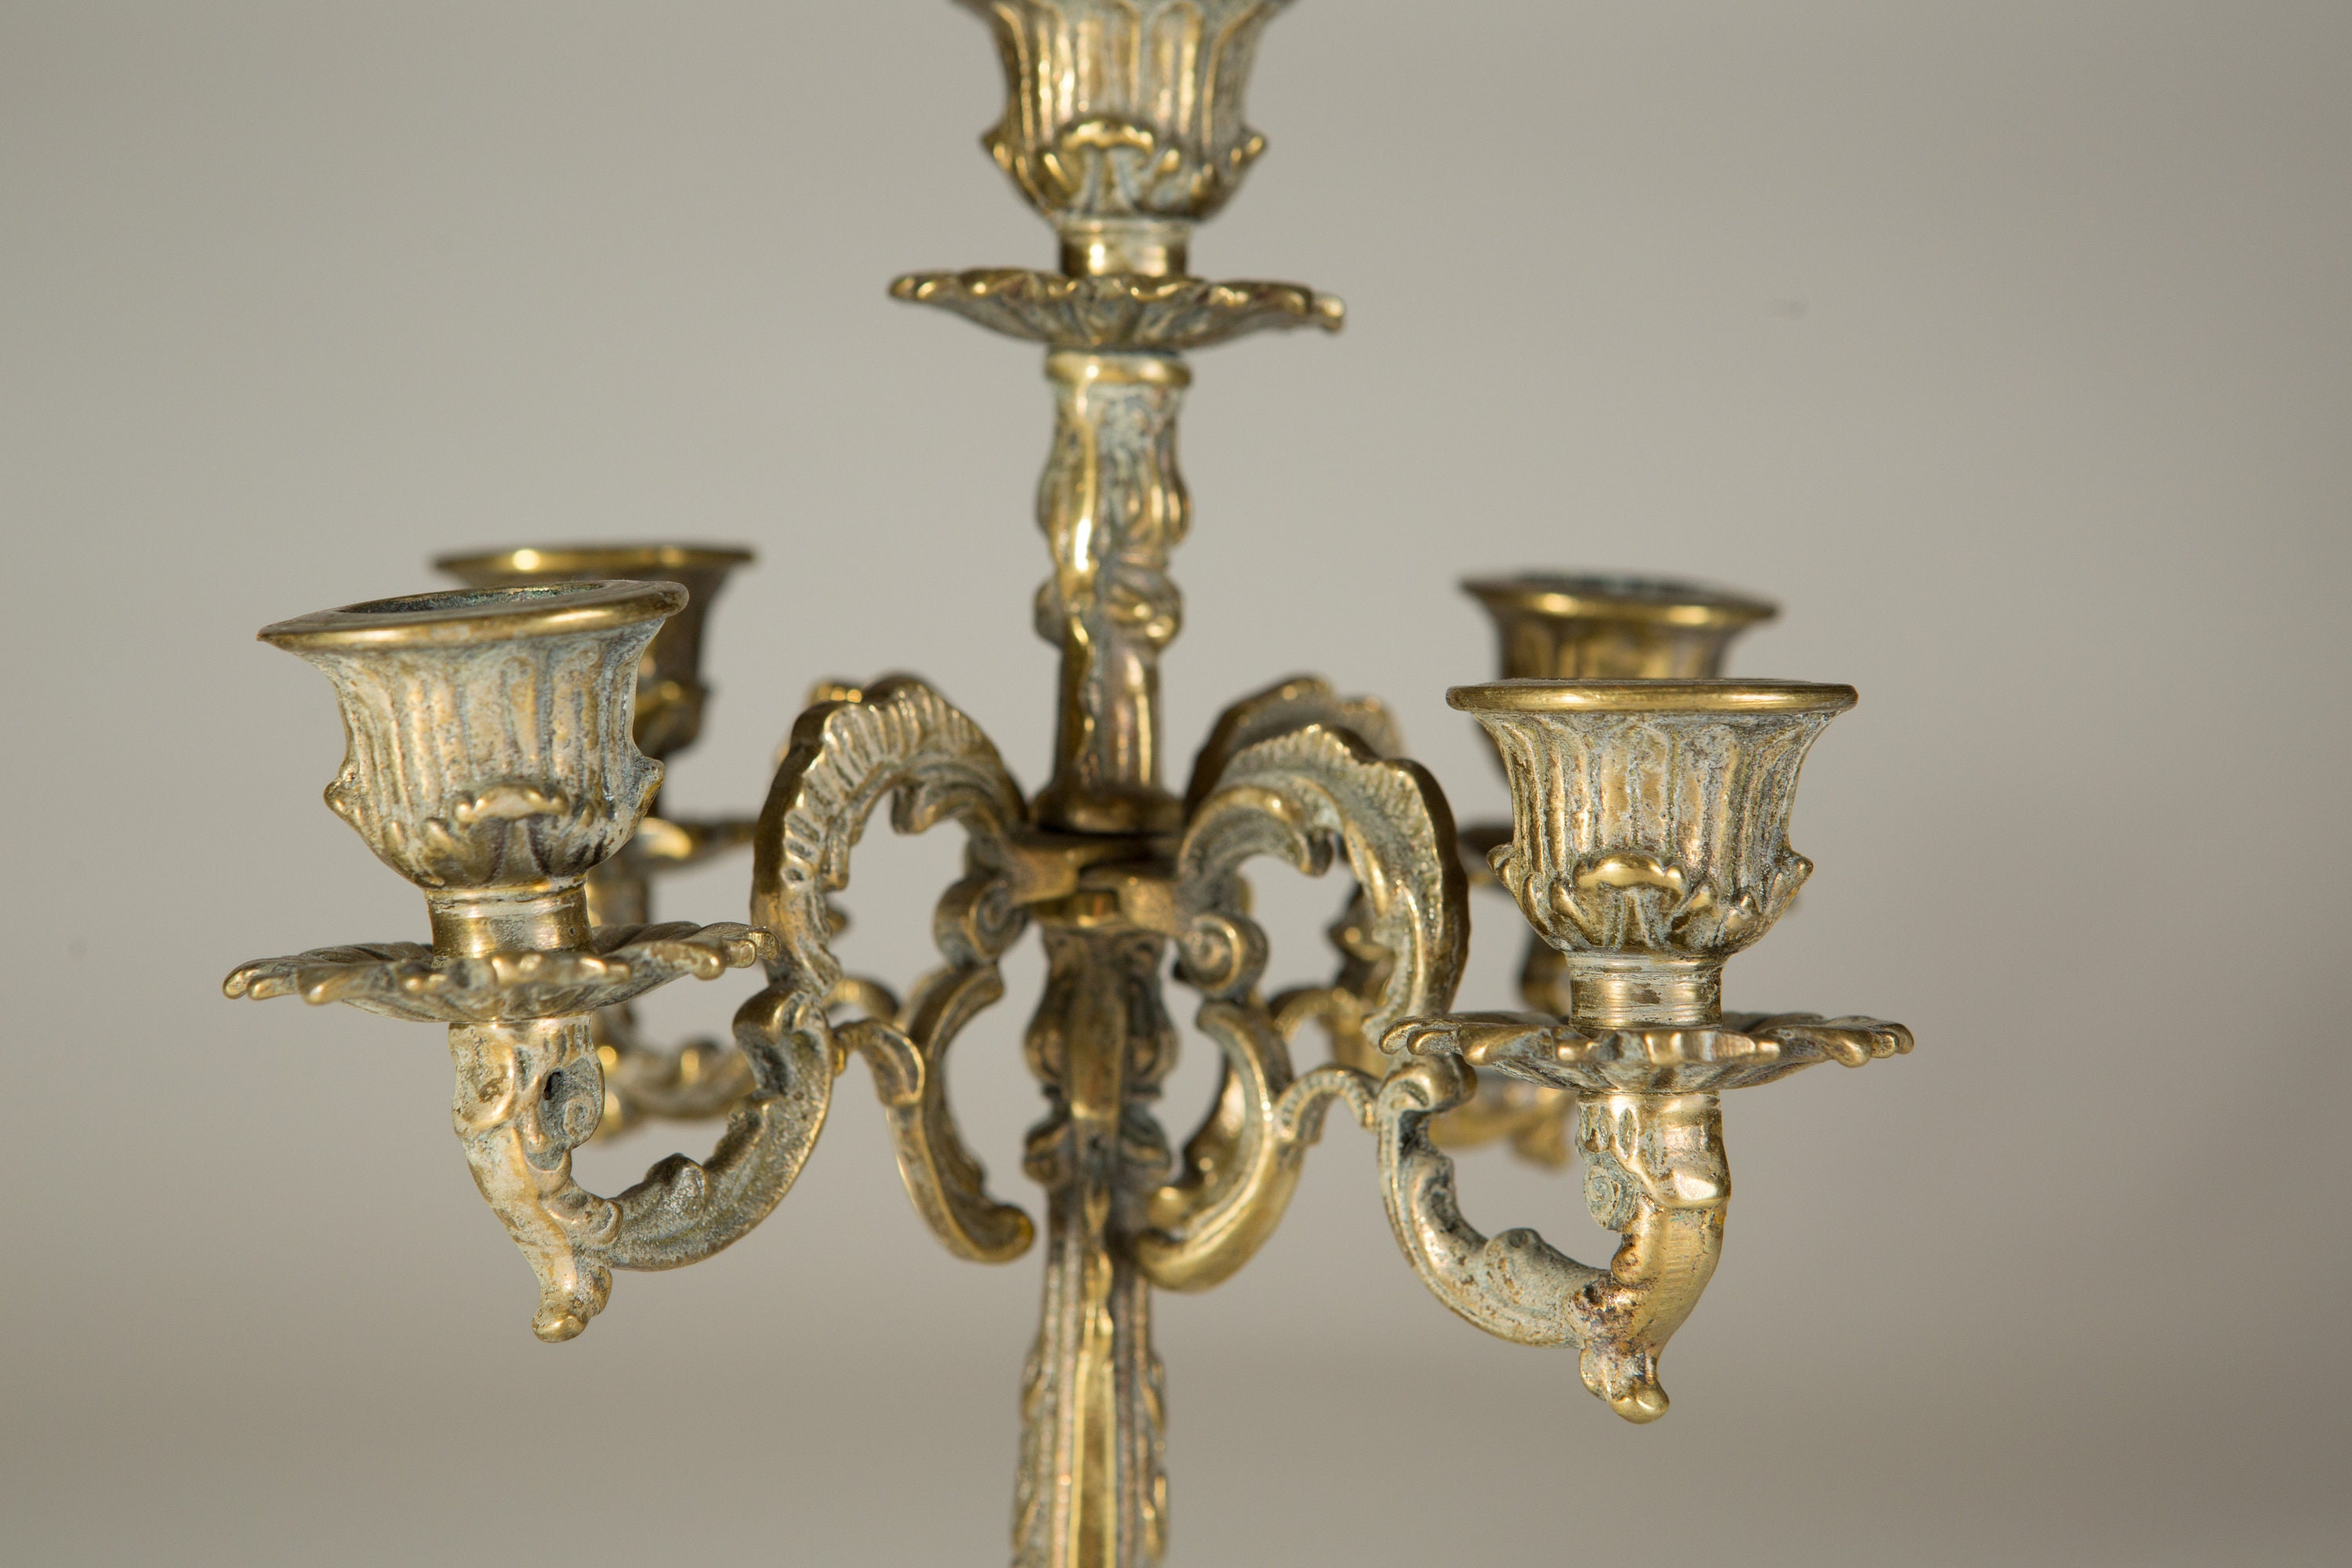 Pair of Antique Brass Church Candle Holders -  Canada